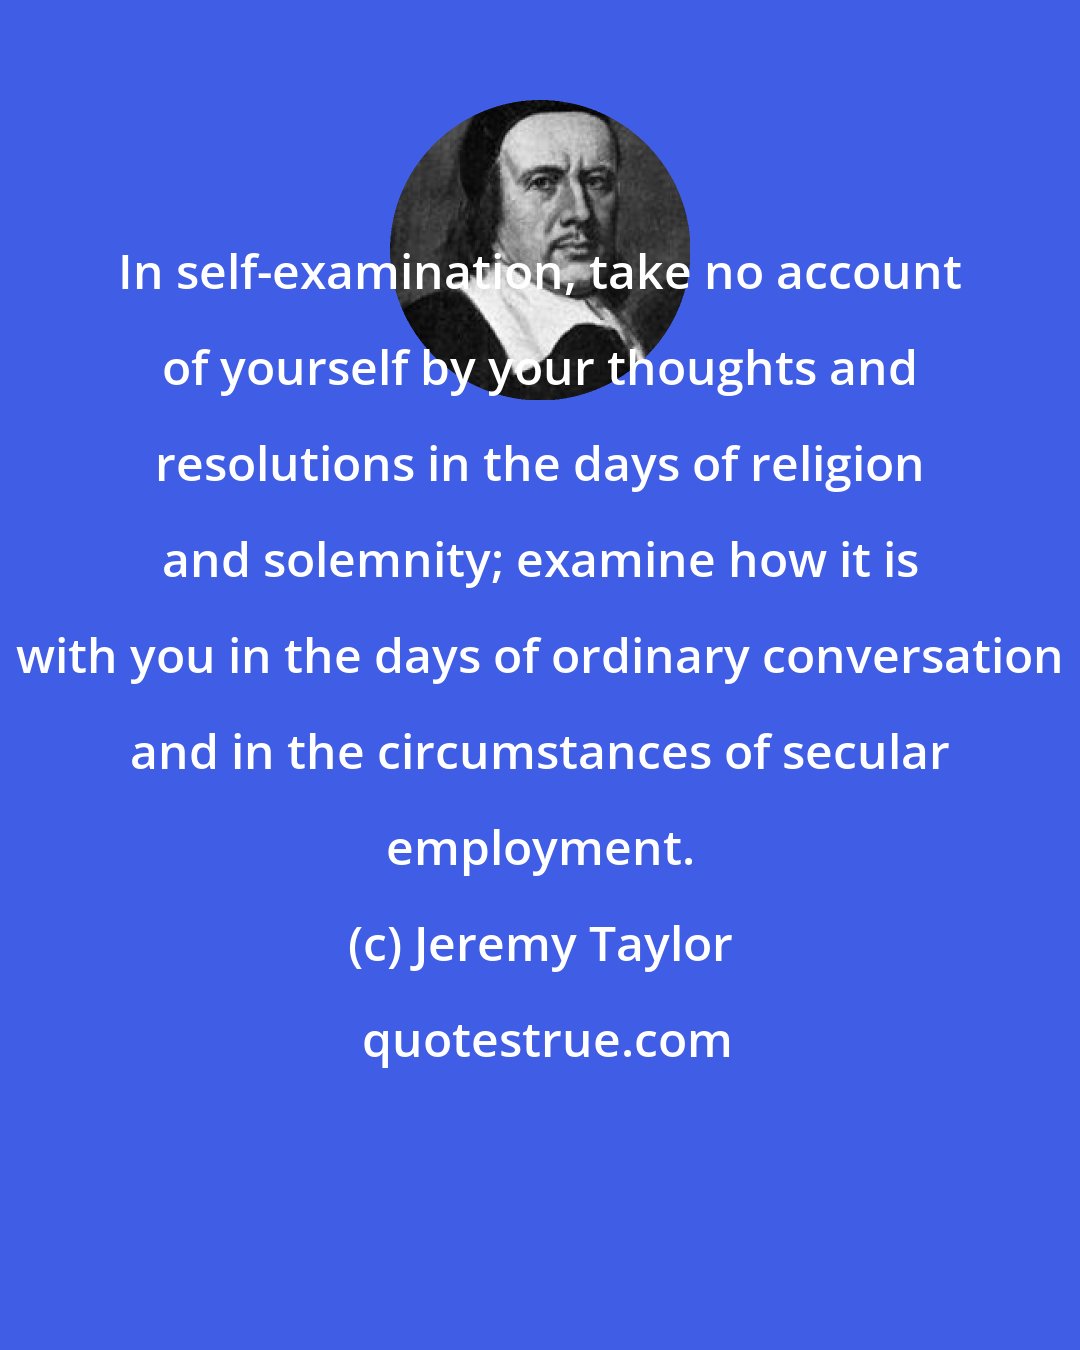 Jeremy Taylor: In self-examination, take no account of yourself by your thoughts and resolutions in the days of religion and solemnity; examine how it is with you in the days of ordinary conversation and in the circumstances of secular employment.